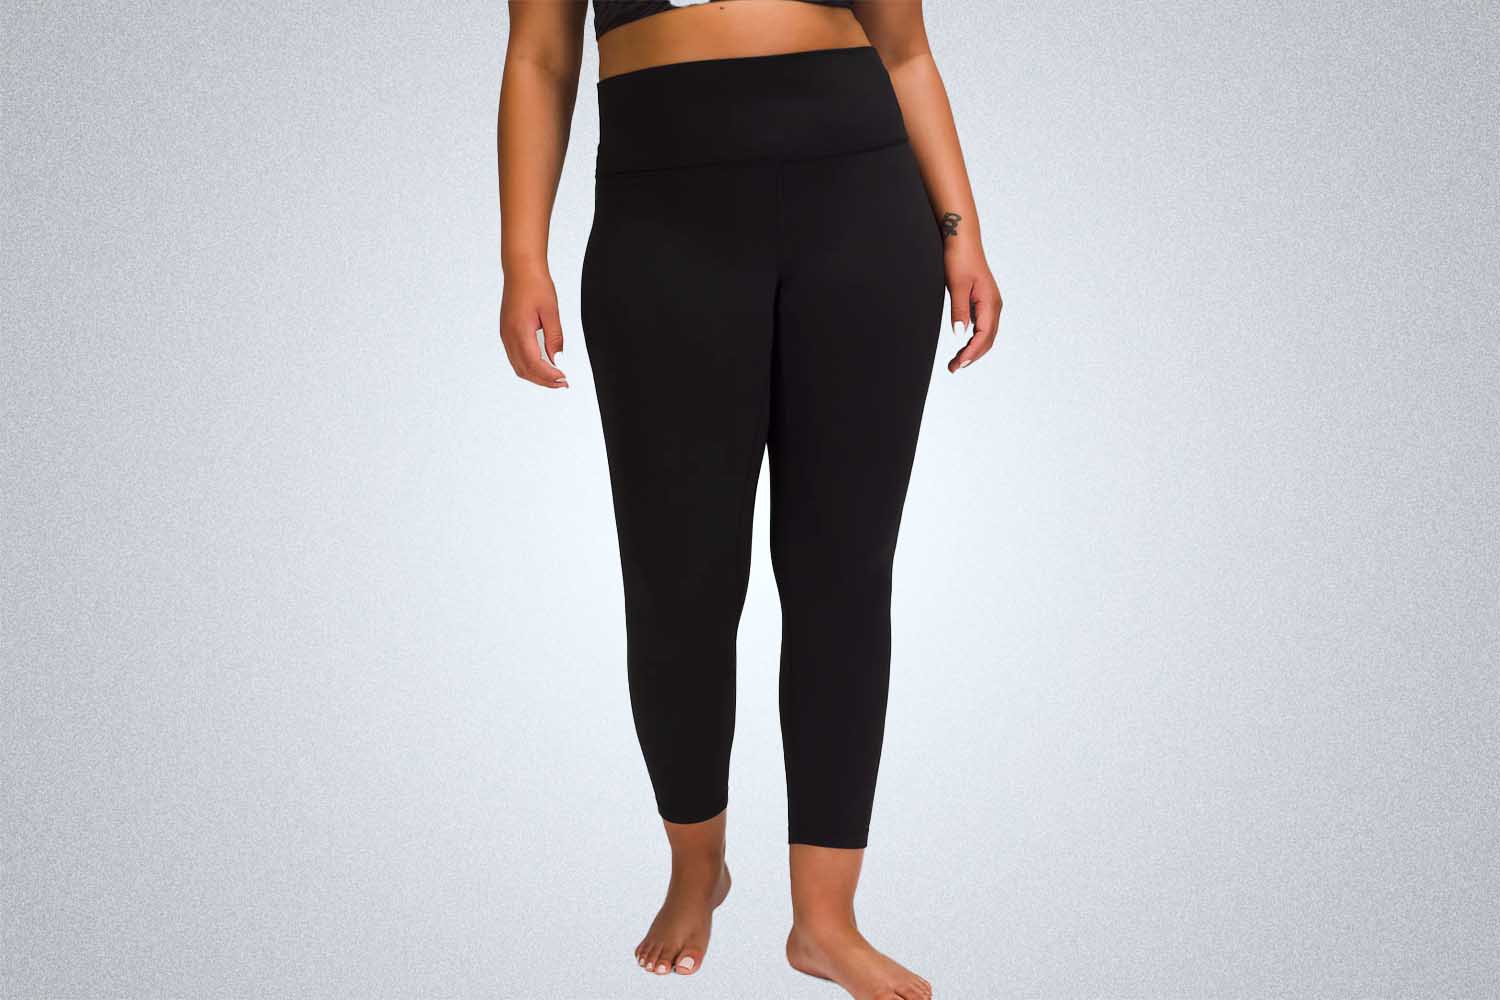 Lululemon Gifts: The 15 Best Gifts for Her - InsideHook